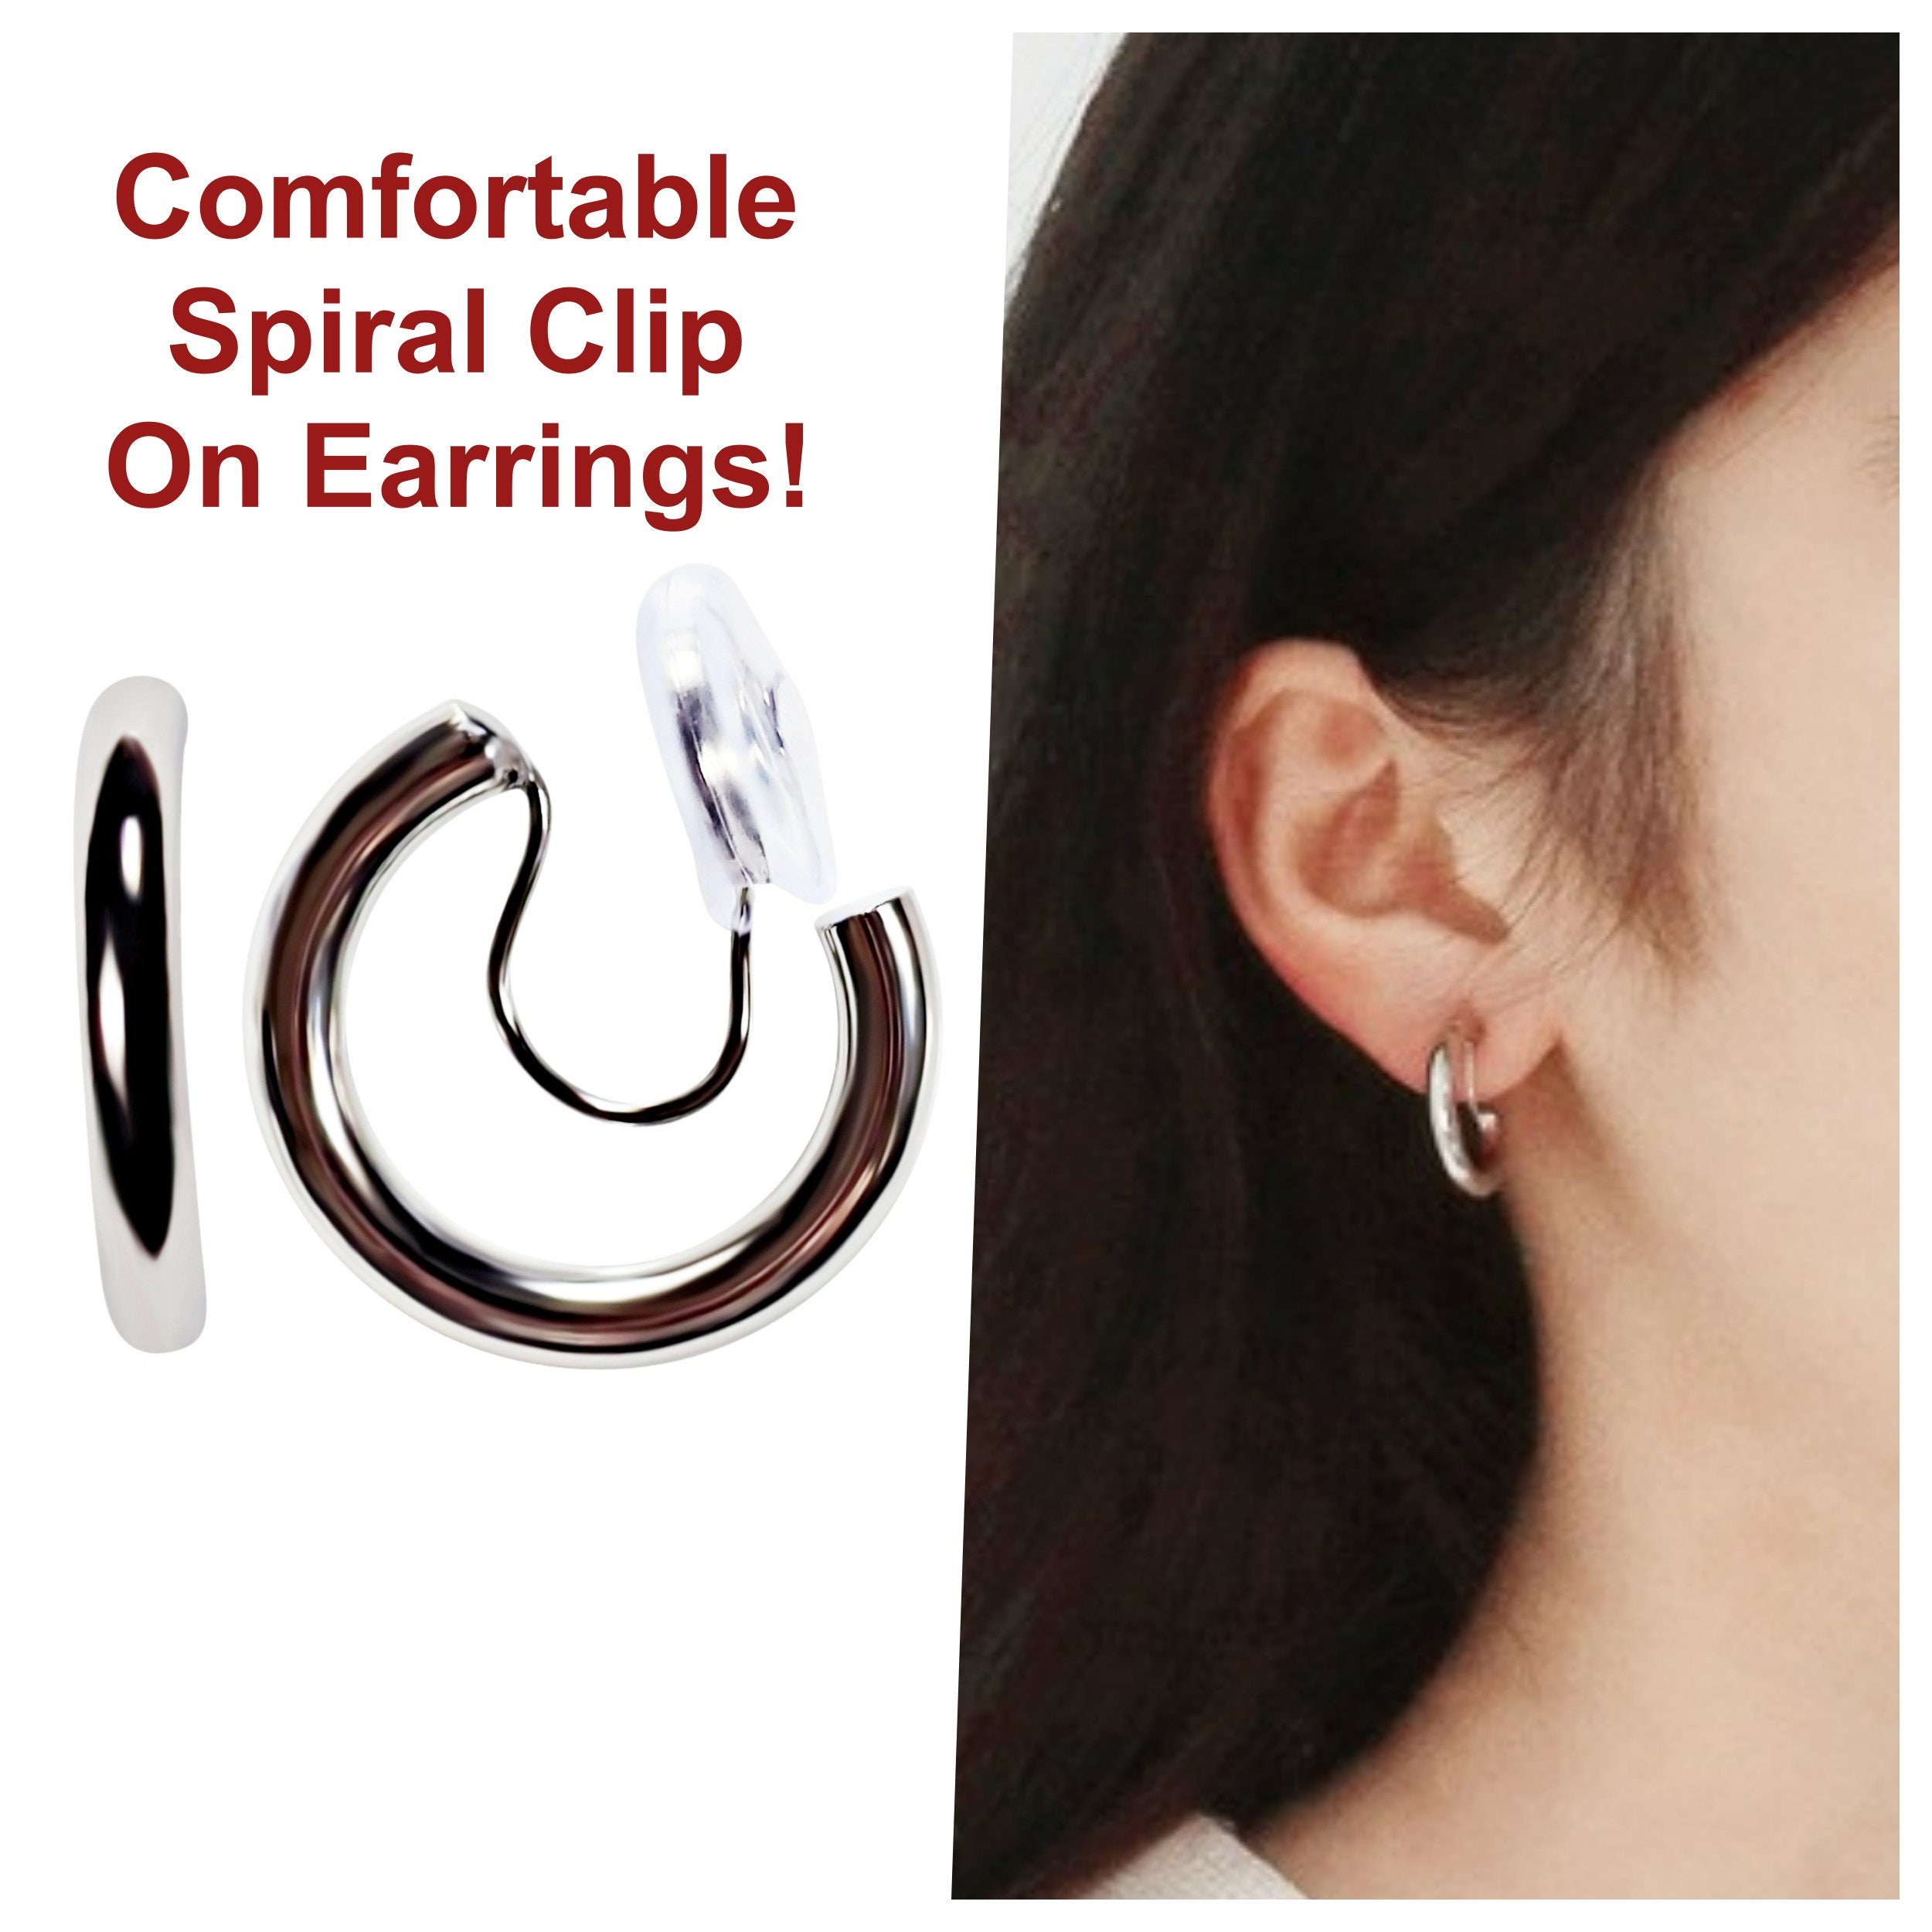 Silver Clip on Earring Converters Pierced to Clip Crystal 